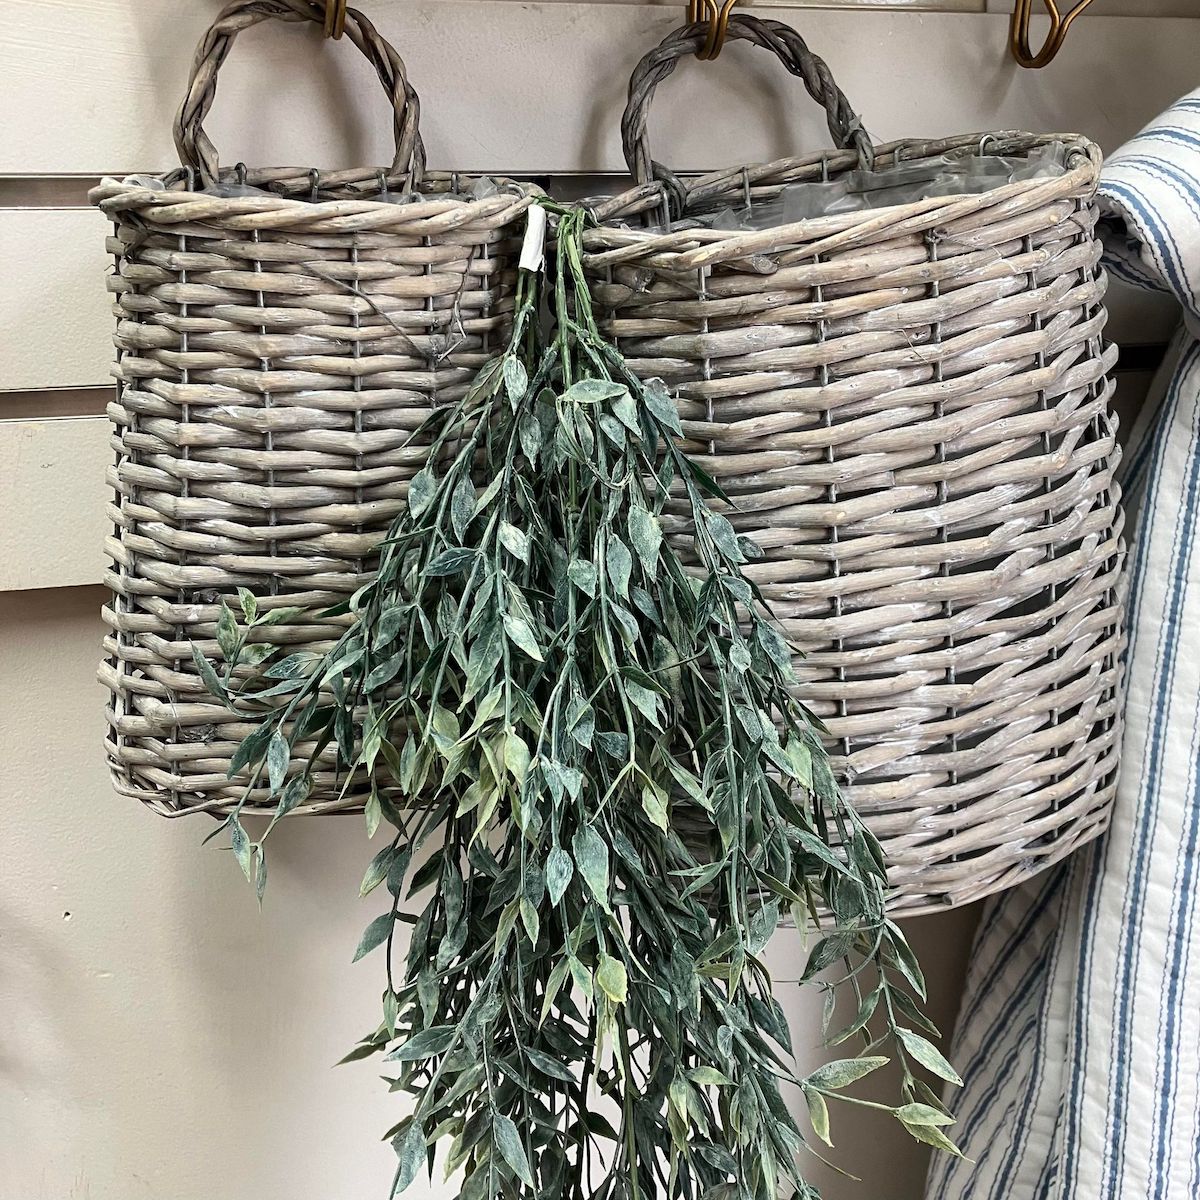 Set of 2 Woven Willow Baskets, perfect for hanging on a hook or door knob